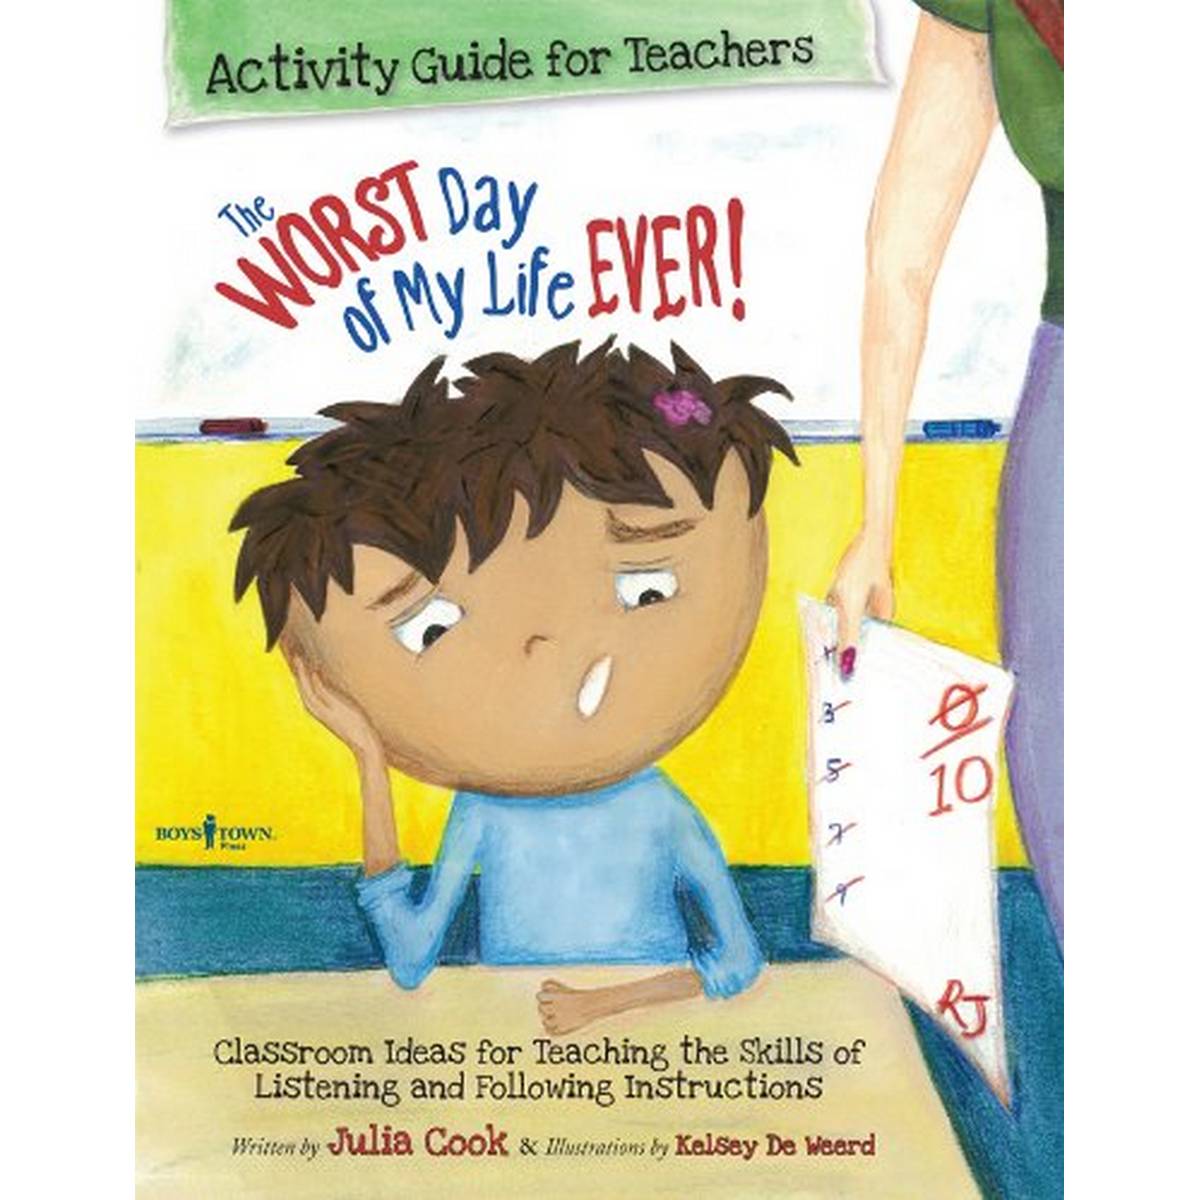 Worst Day of My Life Ever! Activity Guide for Teachers: Classroom Ideas for Teaching the Skills of Listening and Following Instructions